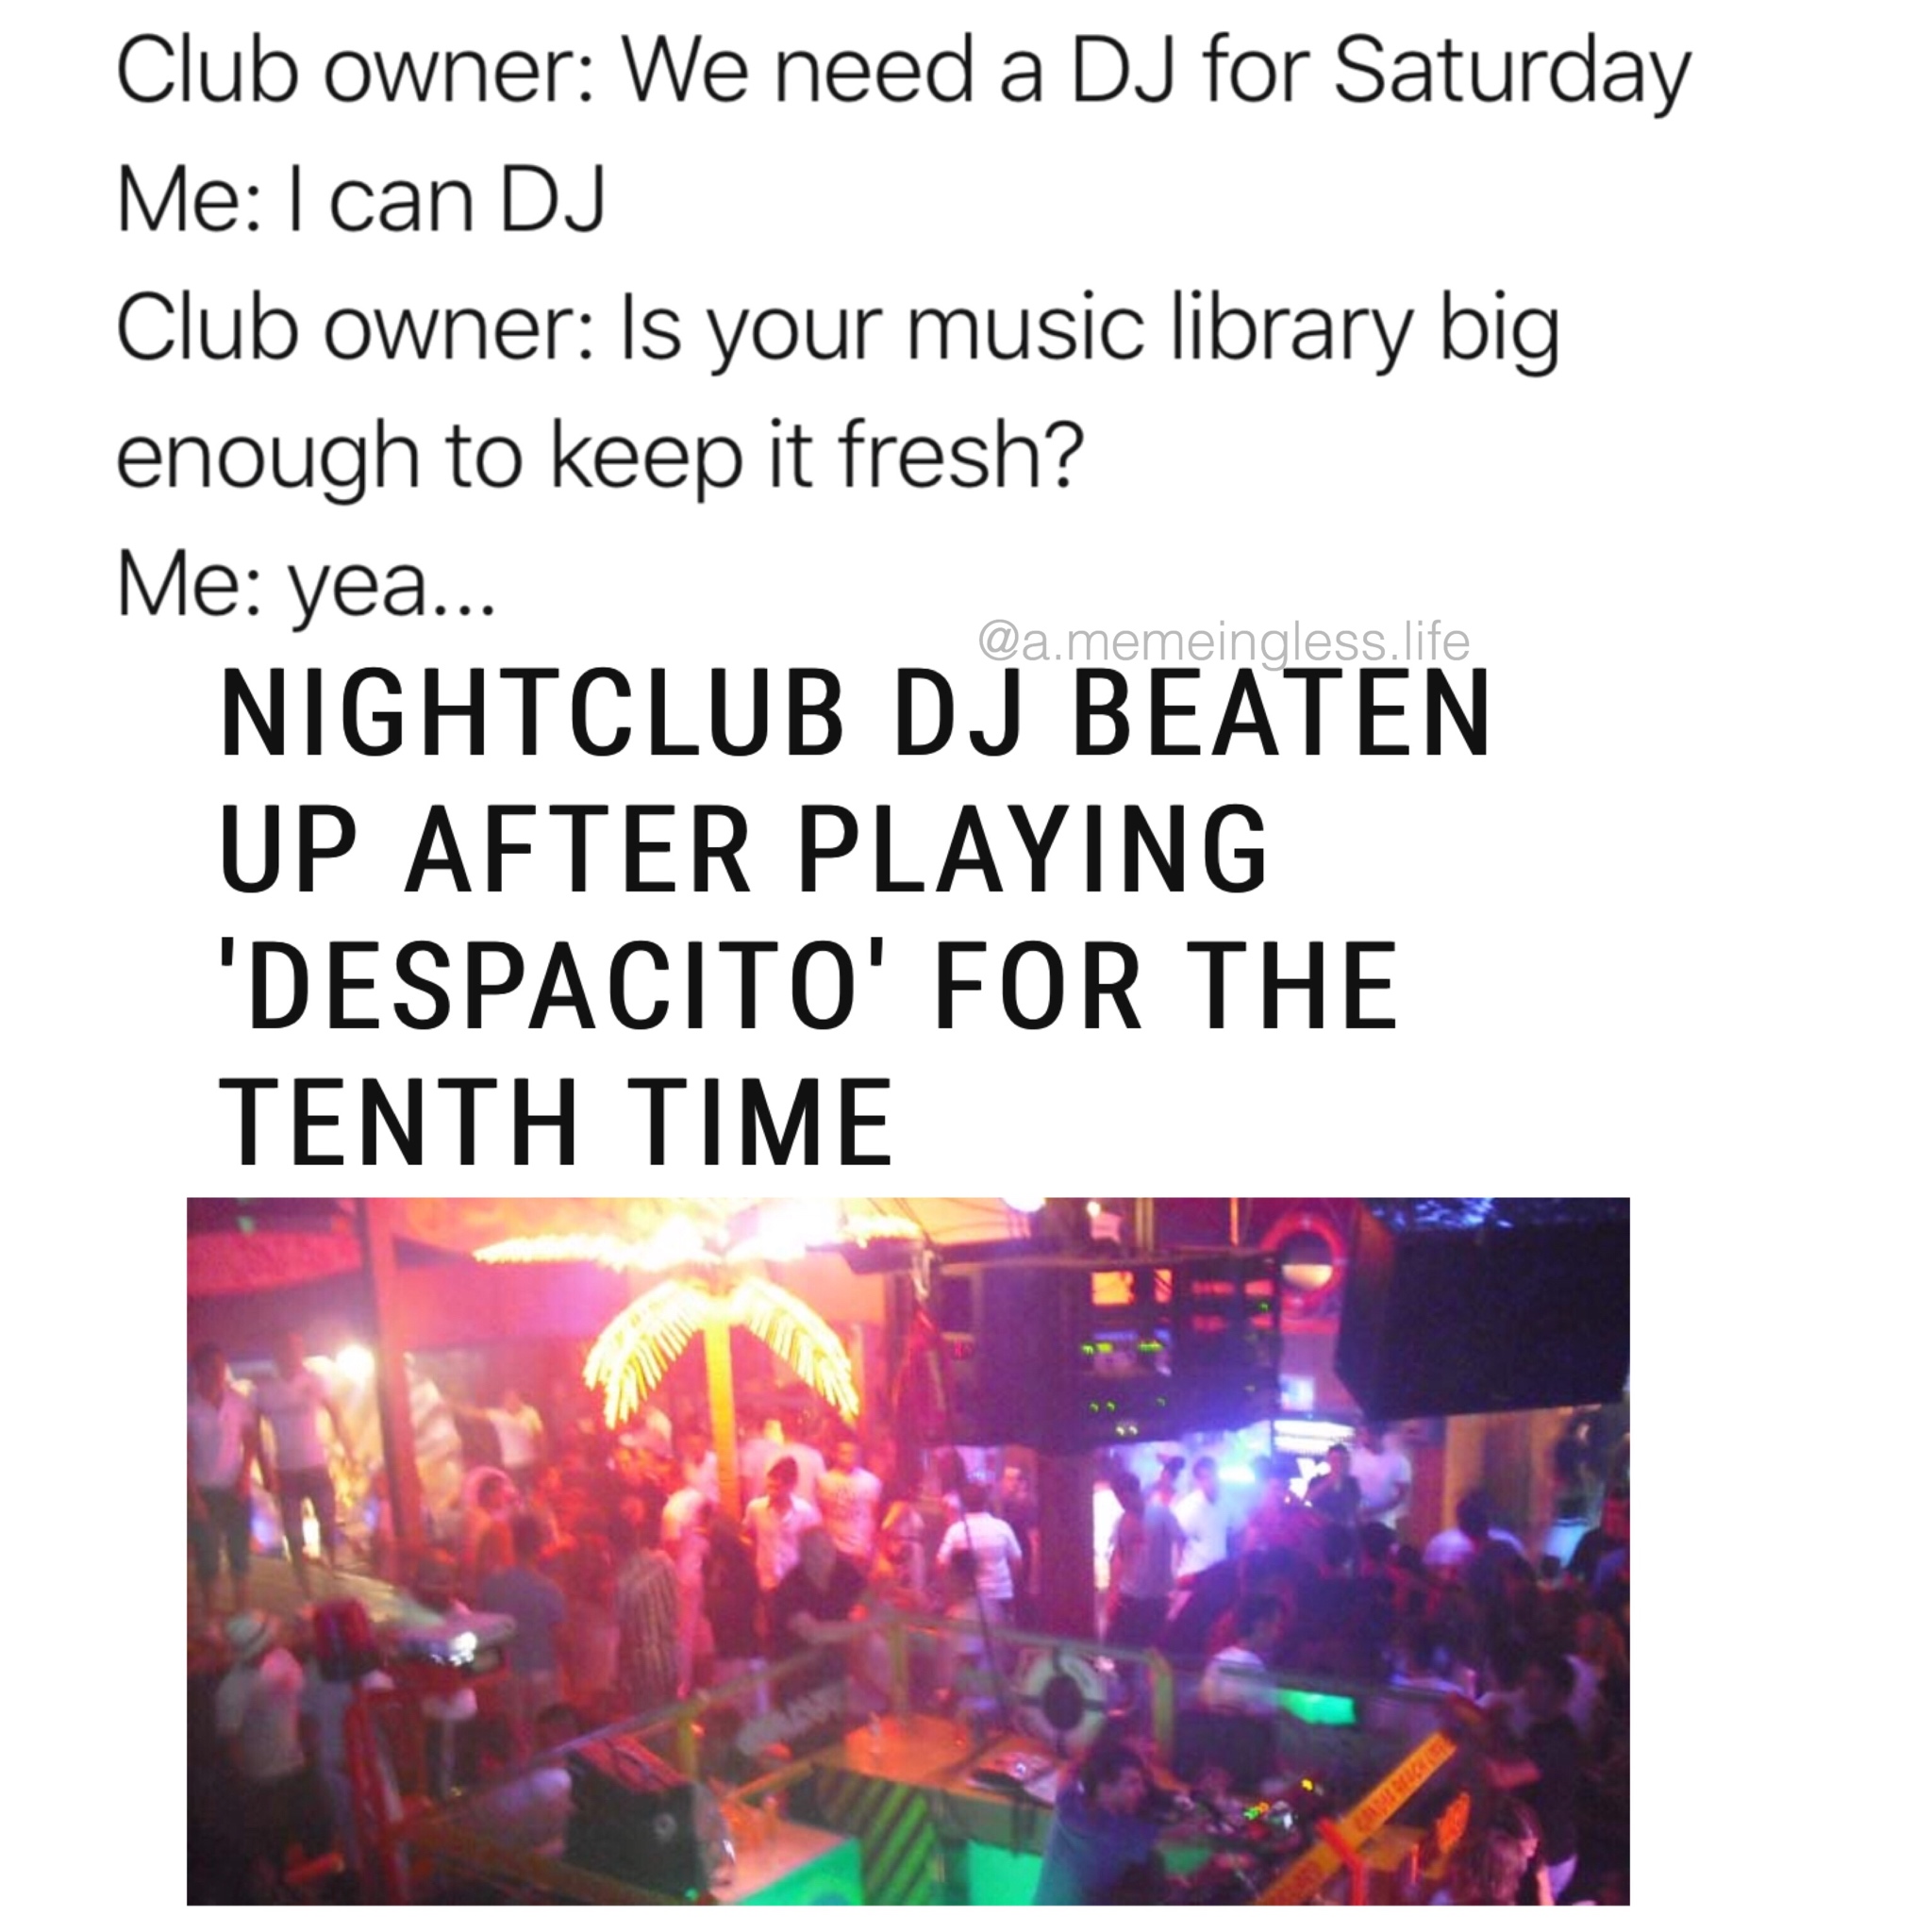 graphics - Club owner We need a Dj for Saturday Me I can Dj Club owner Is your music library big enough to keep it fresh? Me yea... Nightclub Dj Beaten Up After Playing 'Despacito' For The Tenth Time wamemeingless life